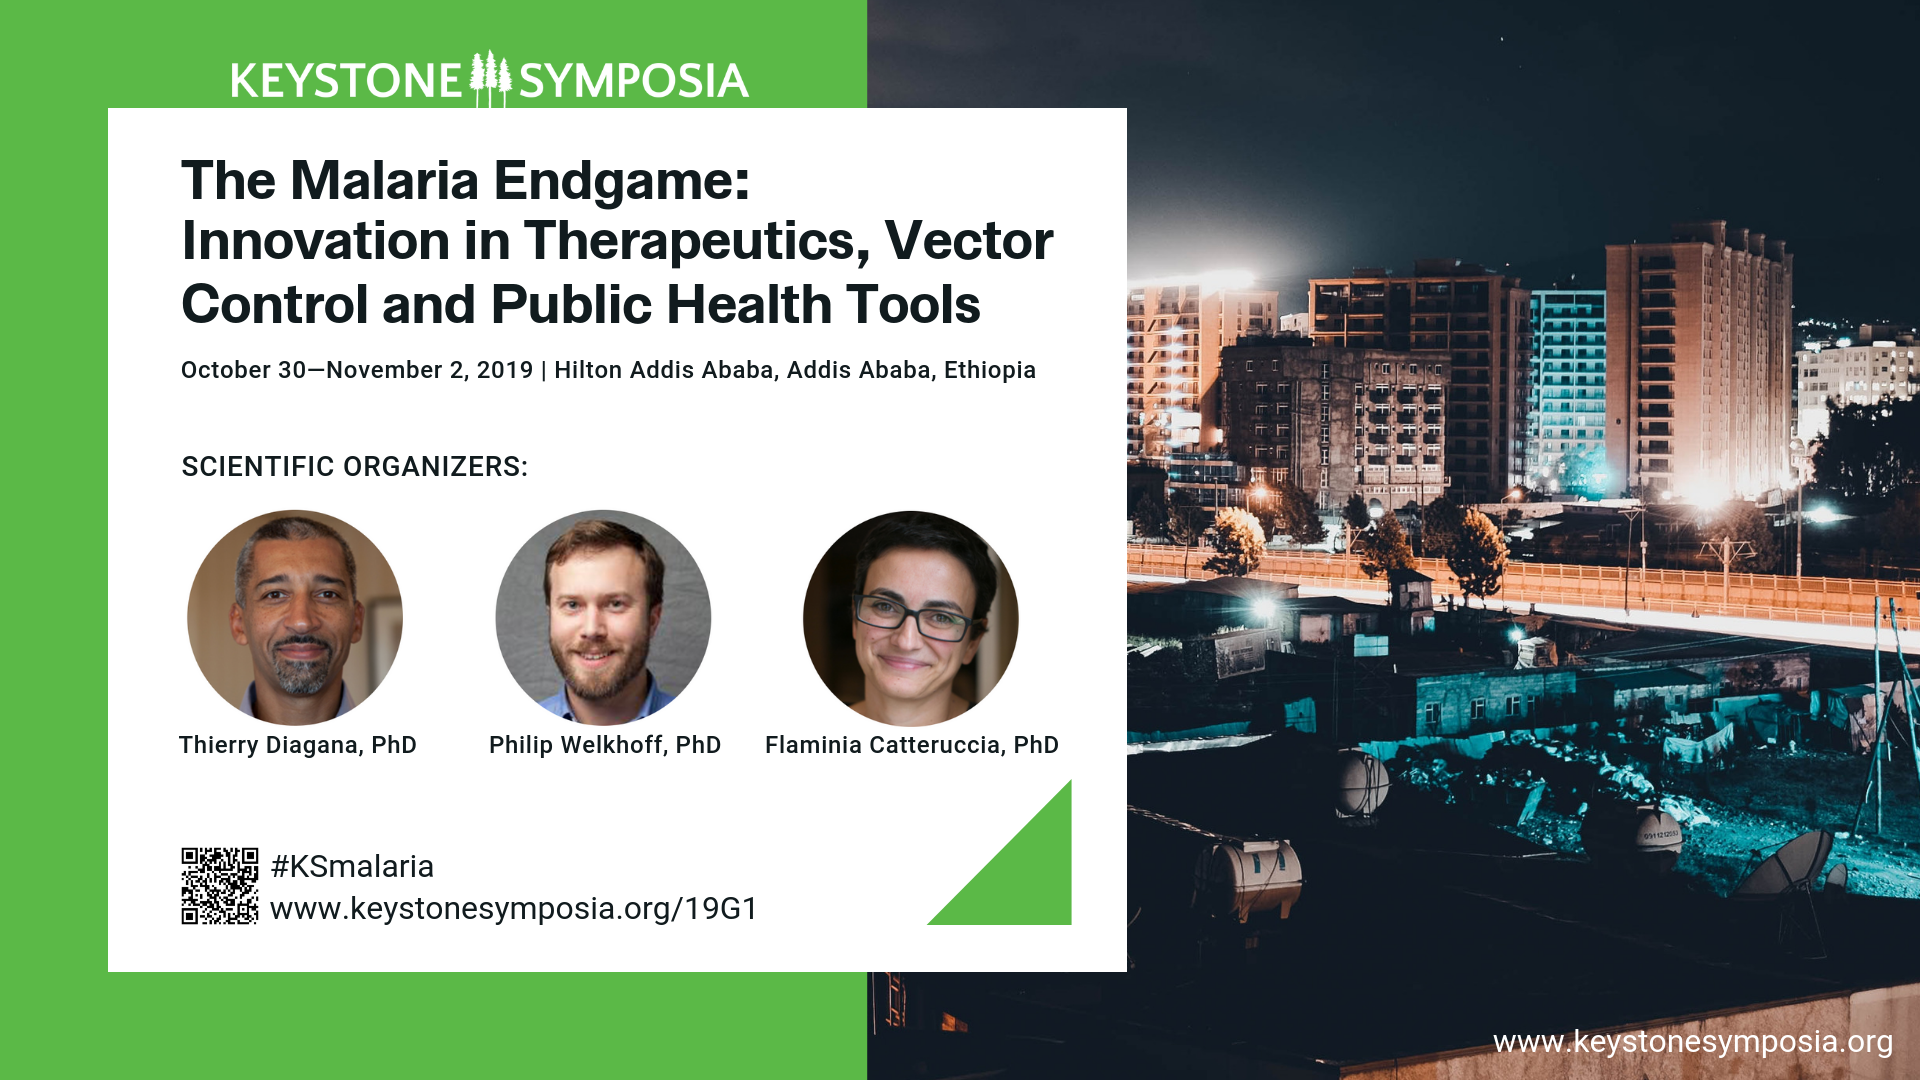 Meeting slide with organizers: The Malaria Endgame: Innovation in Therapeutics, Vector Control and Public Health Tools